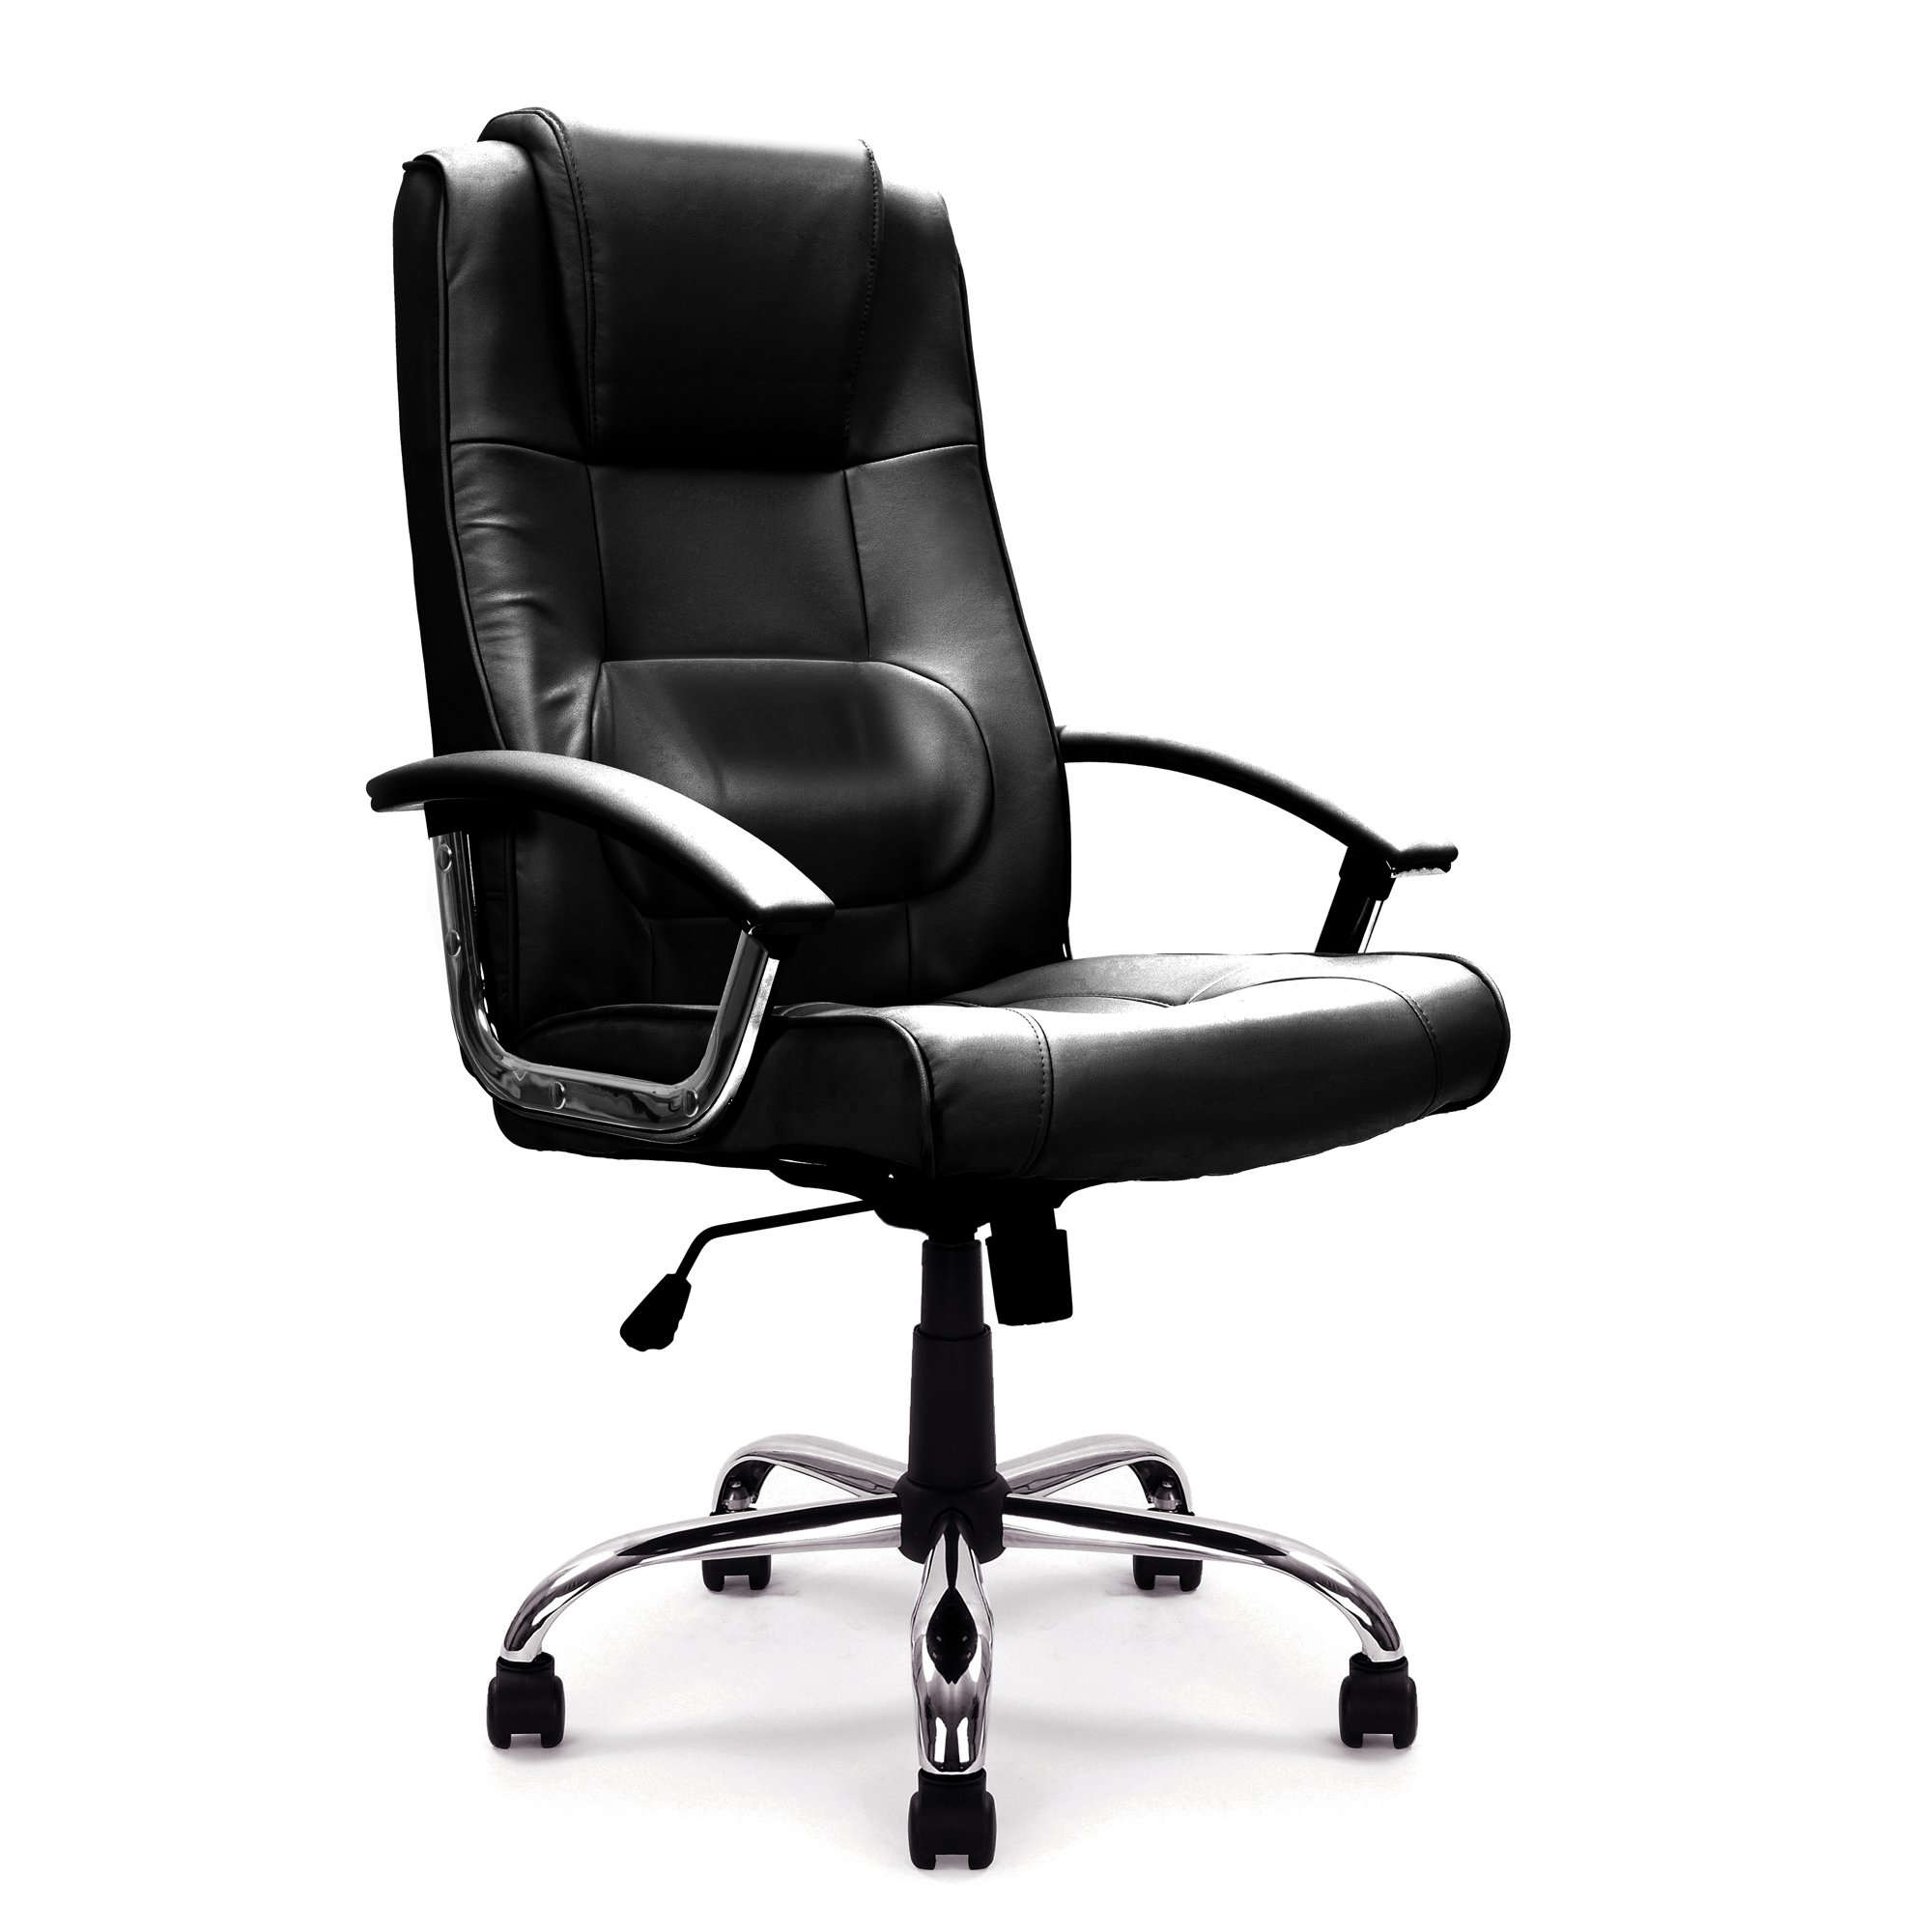 Nautilus Designs Westminster High Back Leather Faced Executive Office Chair With